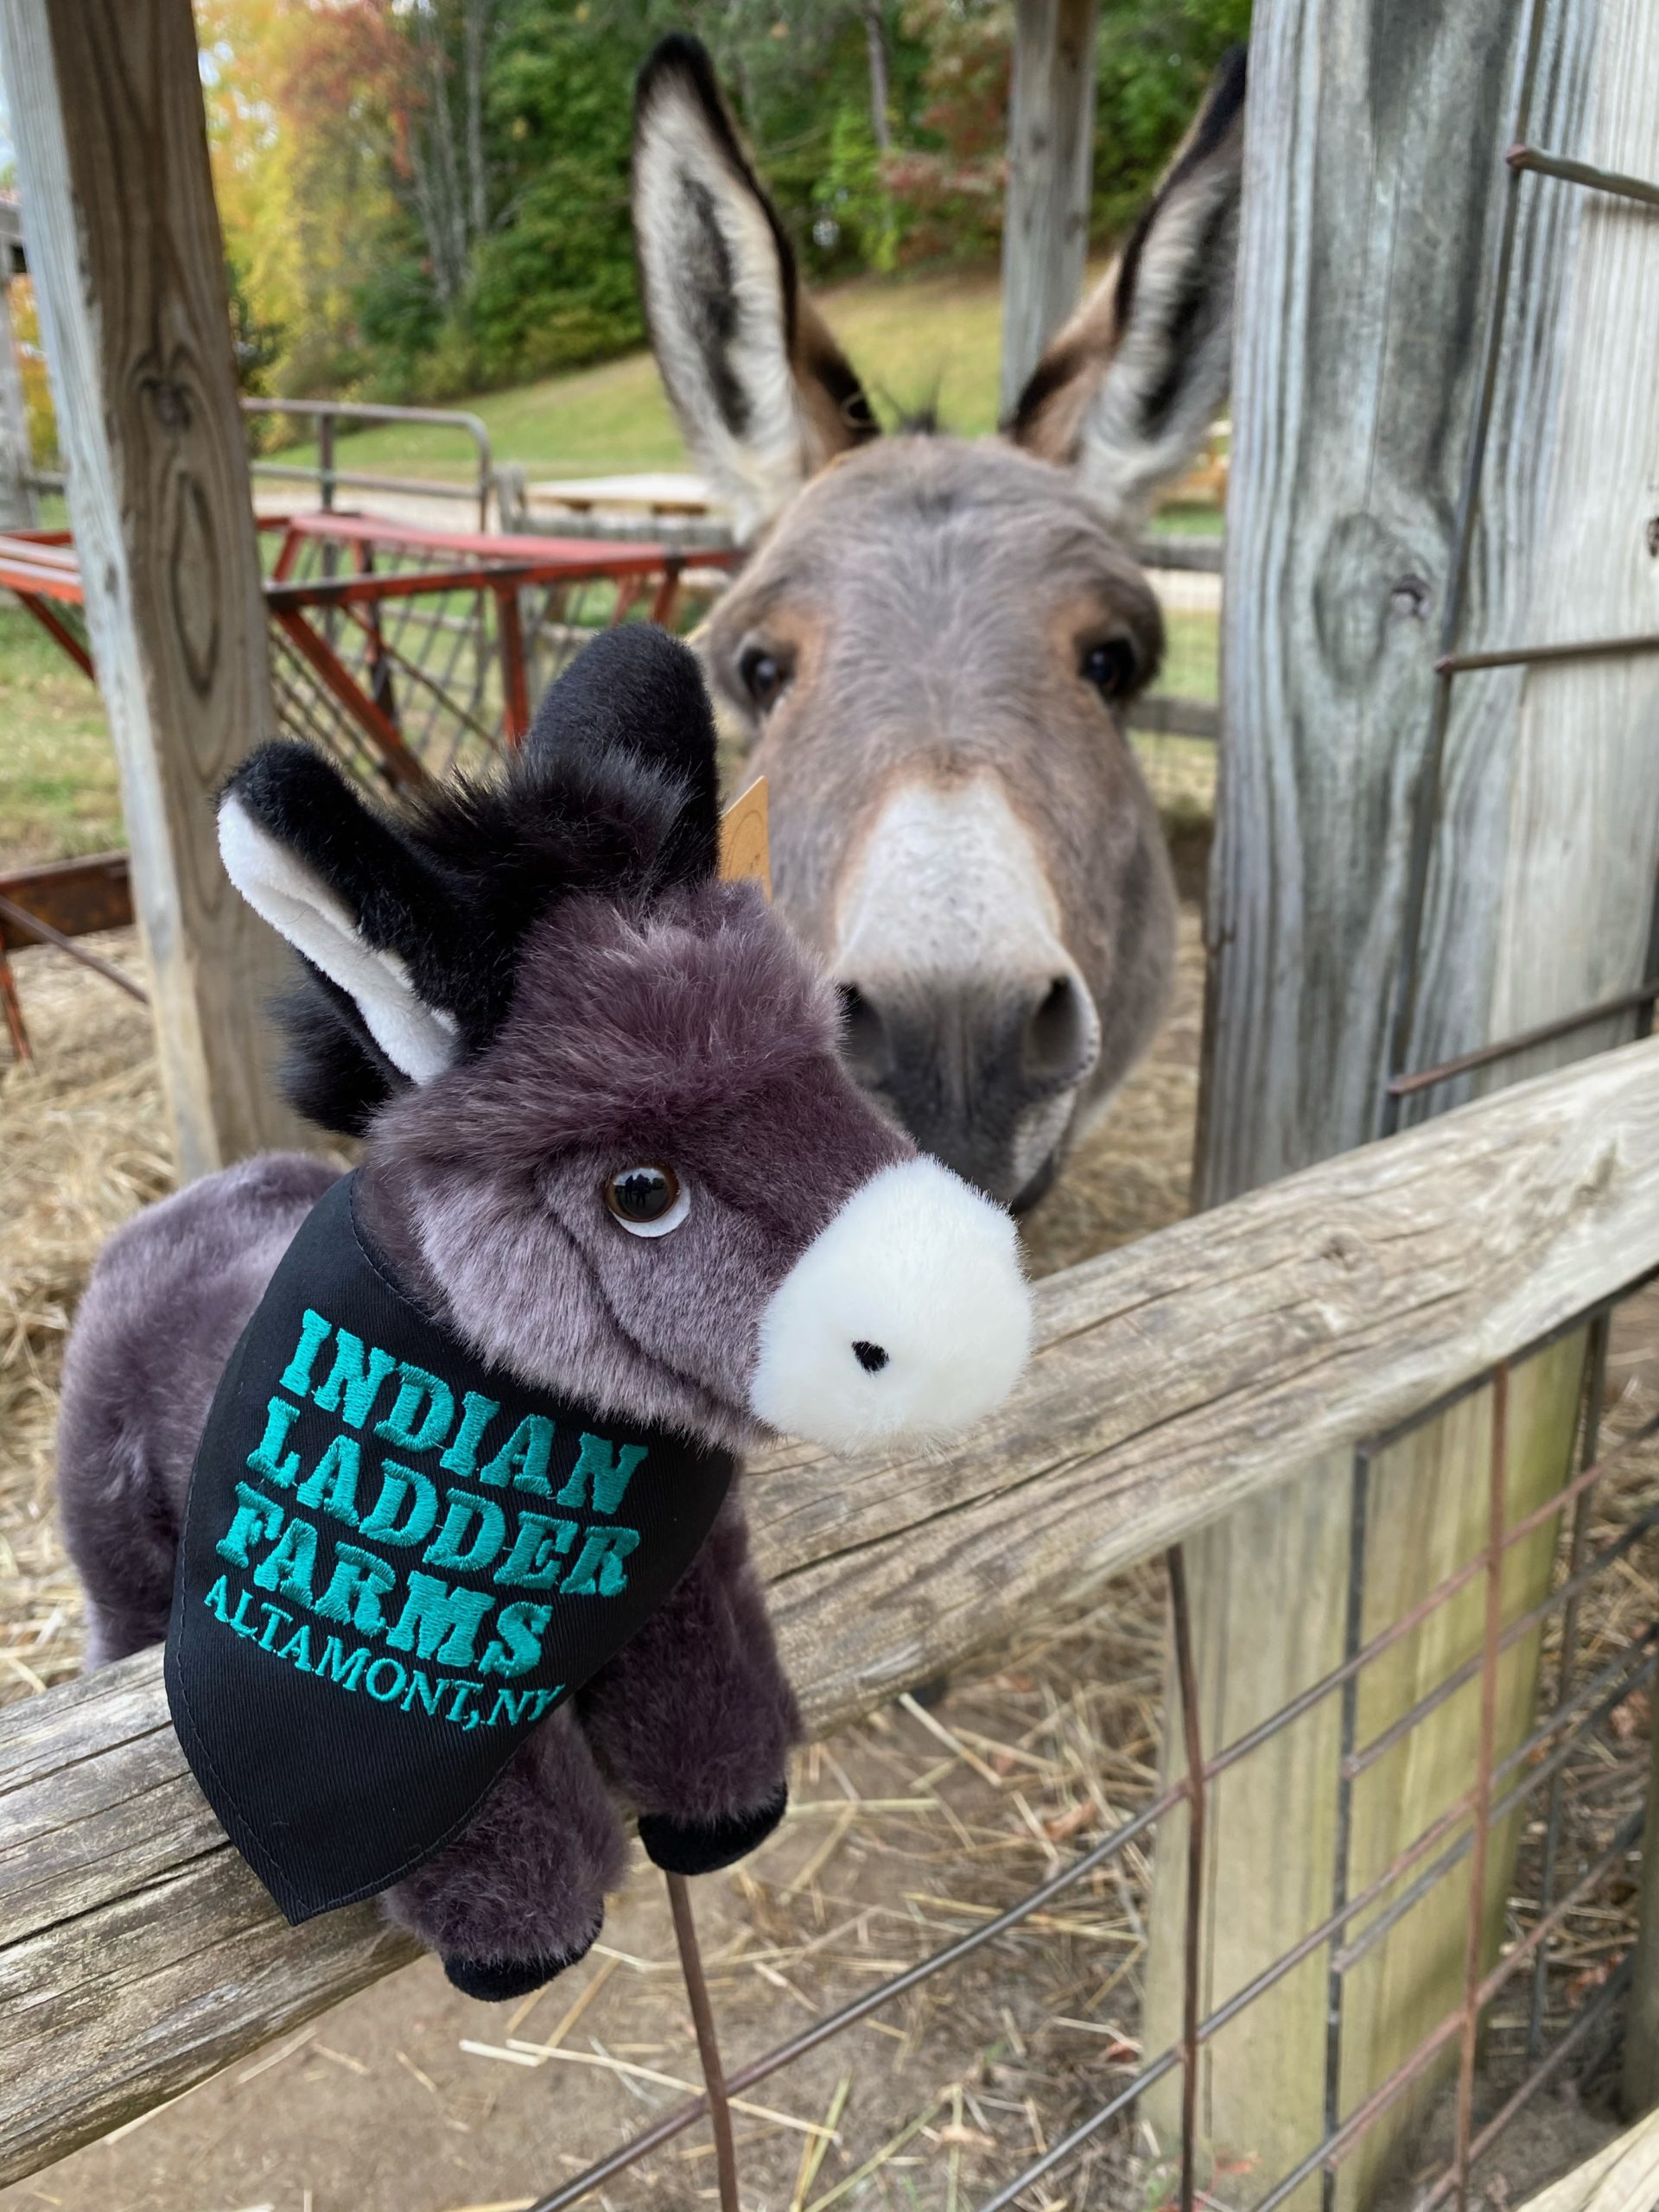 Simon a donkey, in his pen with a stuffed animal of a donkey placed in front of him.